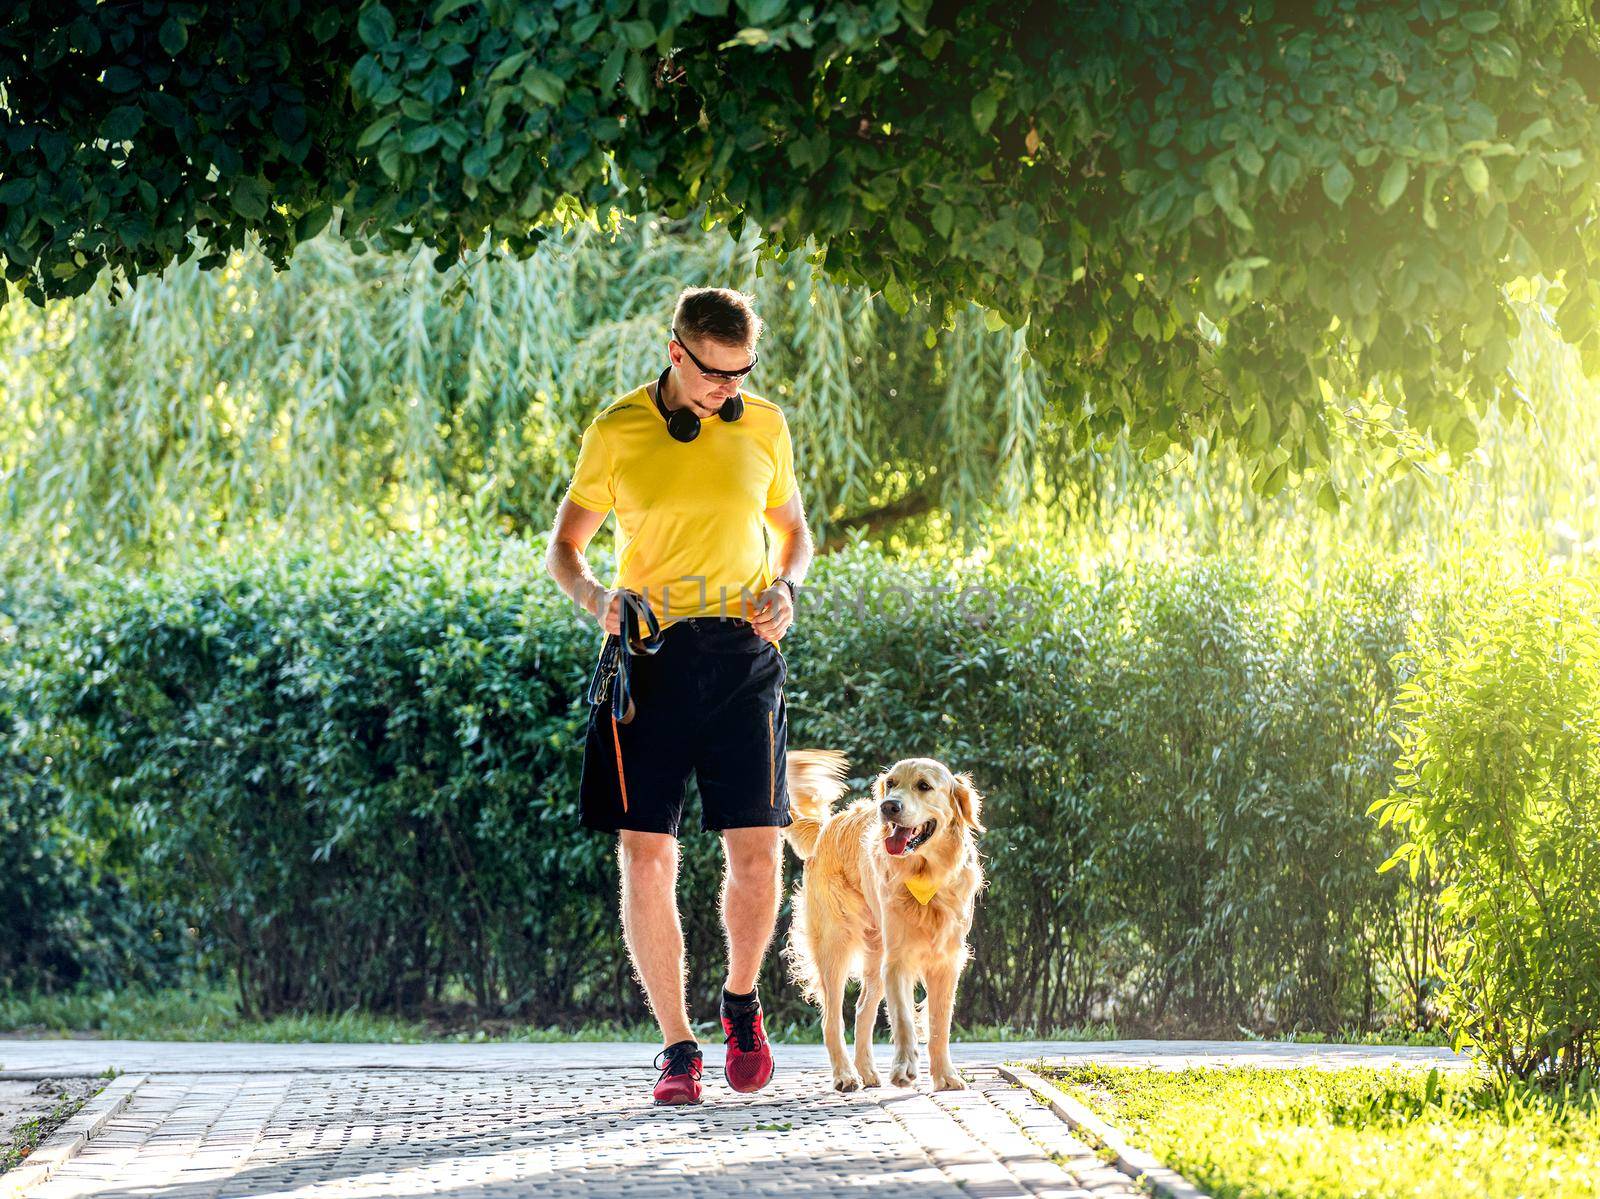 Young man jogging in park with golden retriever dog